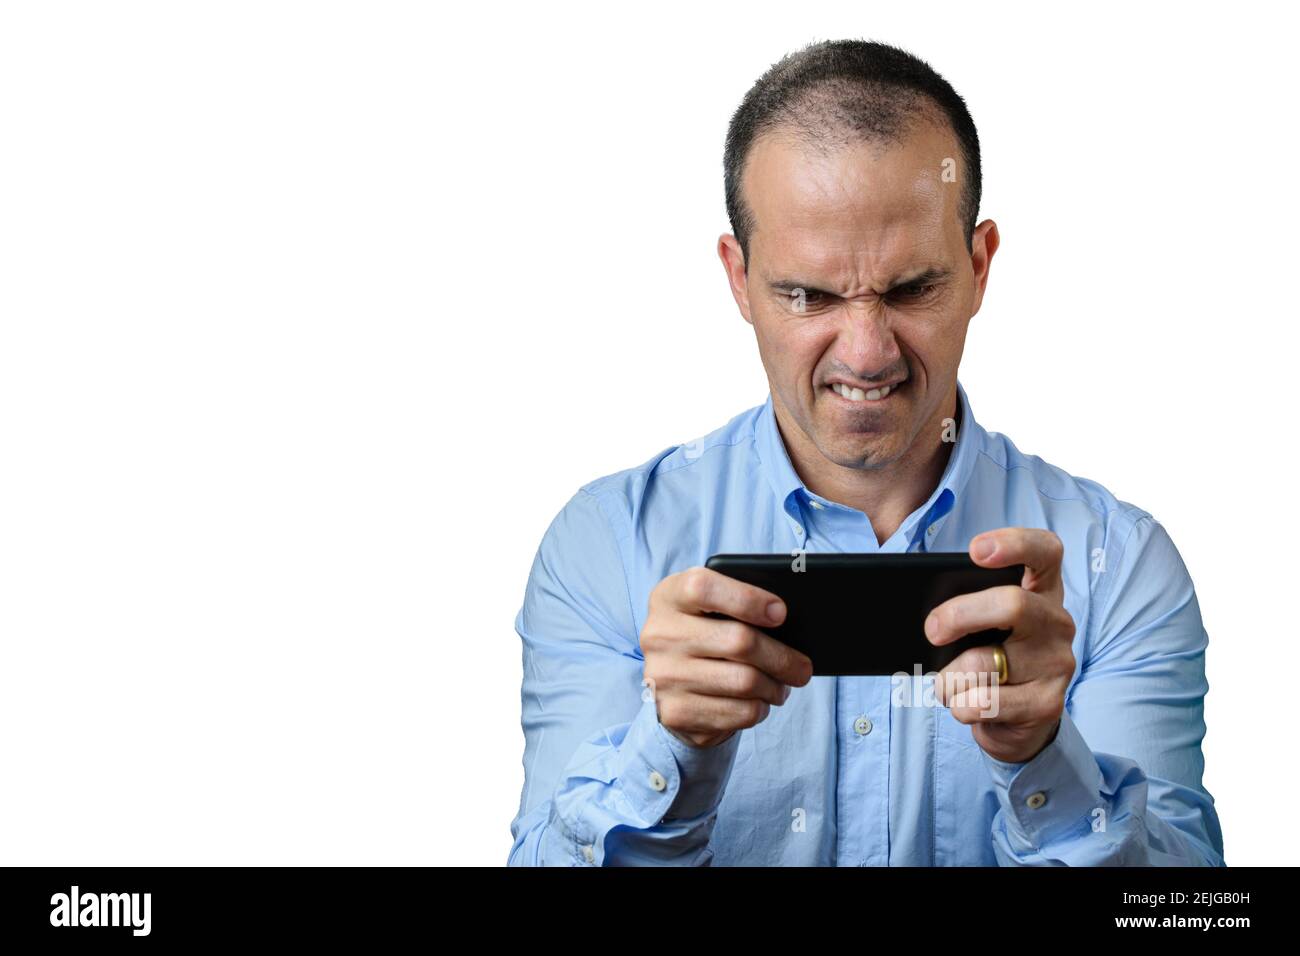 Mature man in formal wear playing on his smartphone and biting his lower lip. Stock Photo